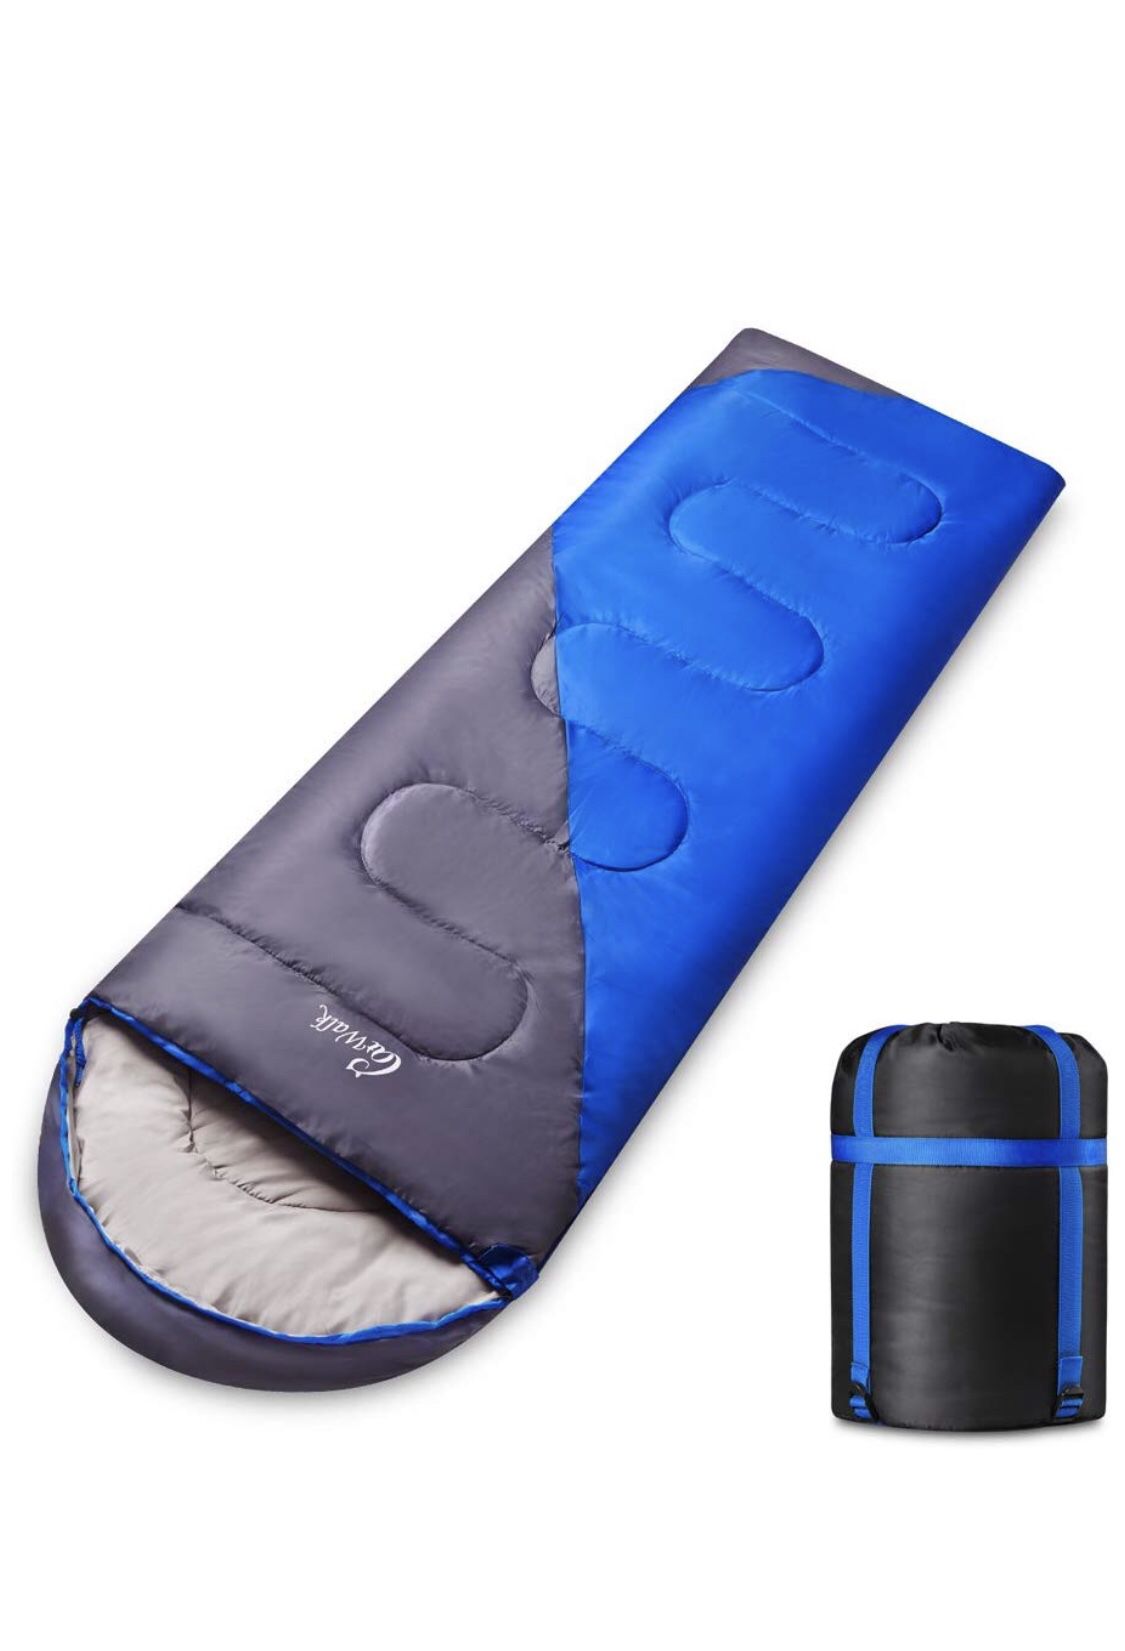 Envelope Sleeping Bag, Waterproof & Lightweight Sleeping Bags with Compression Sack, Suitable for Traveling, Camping, Hiking, Outdoor Activities